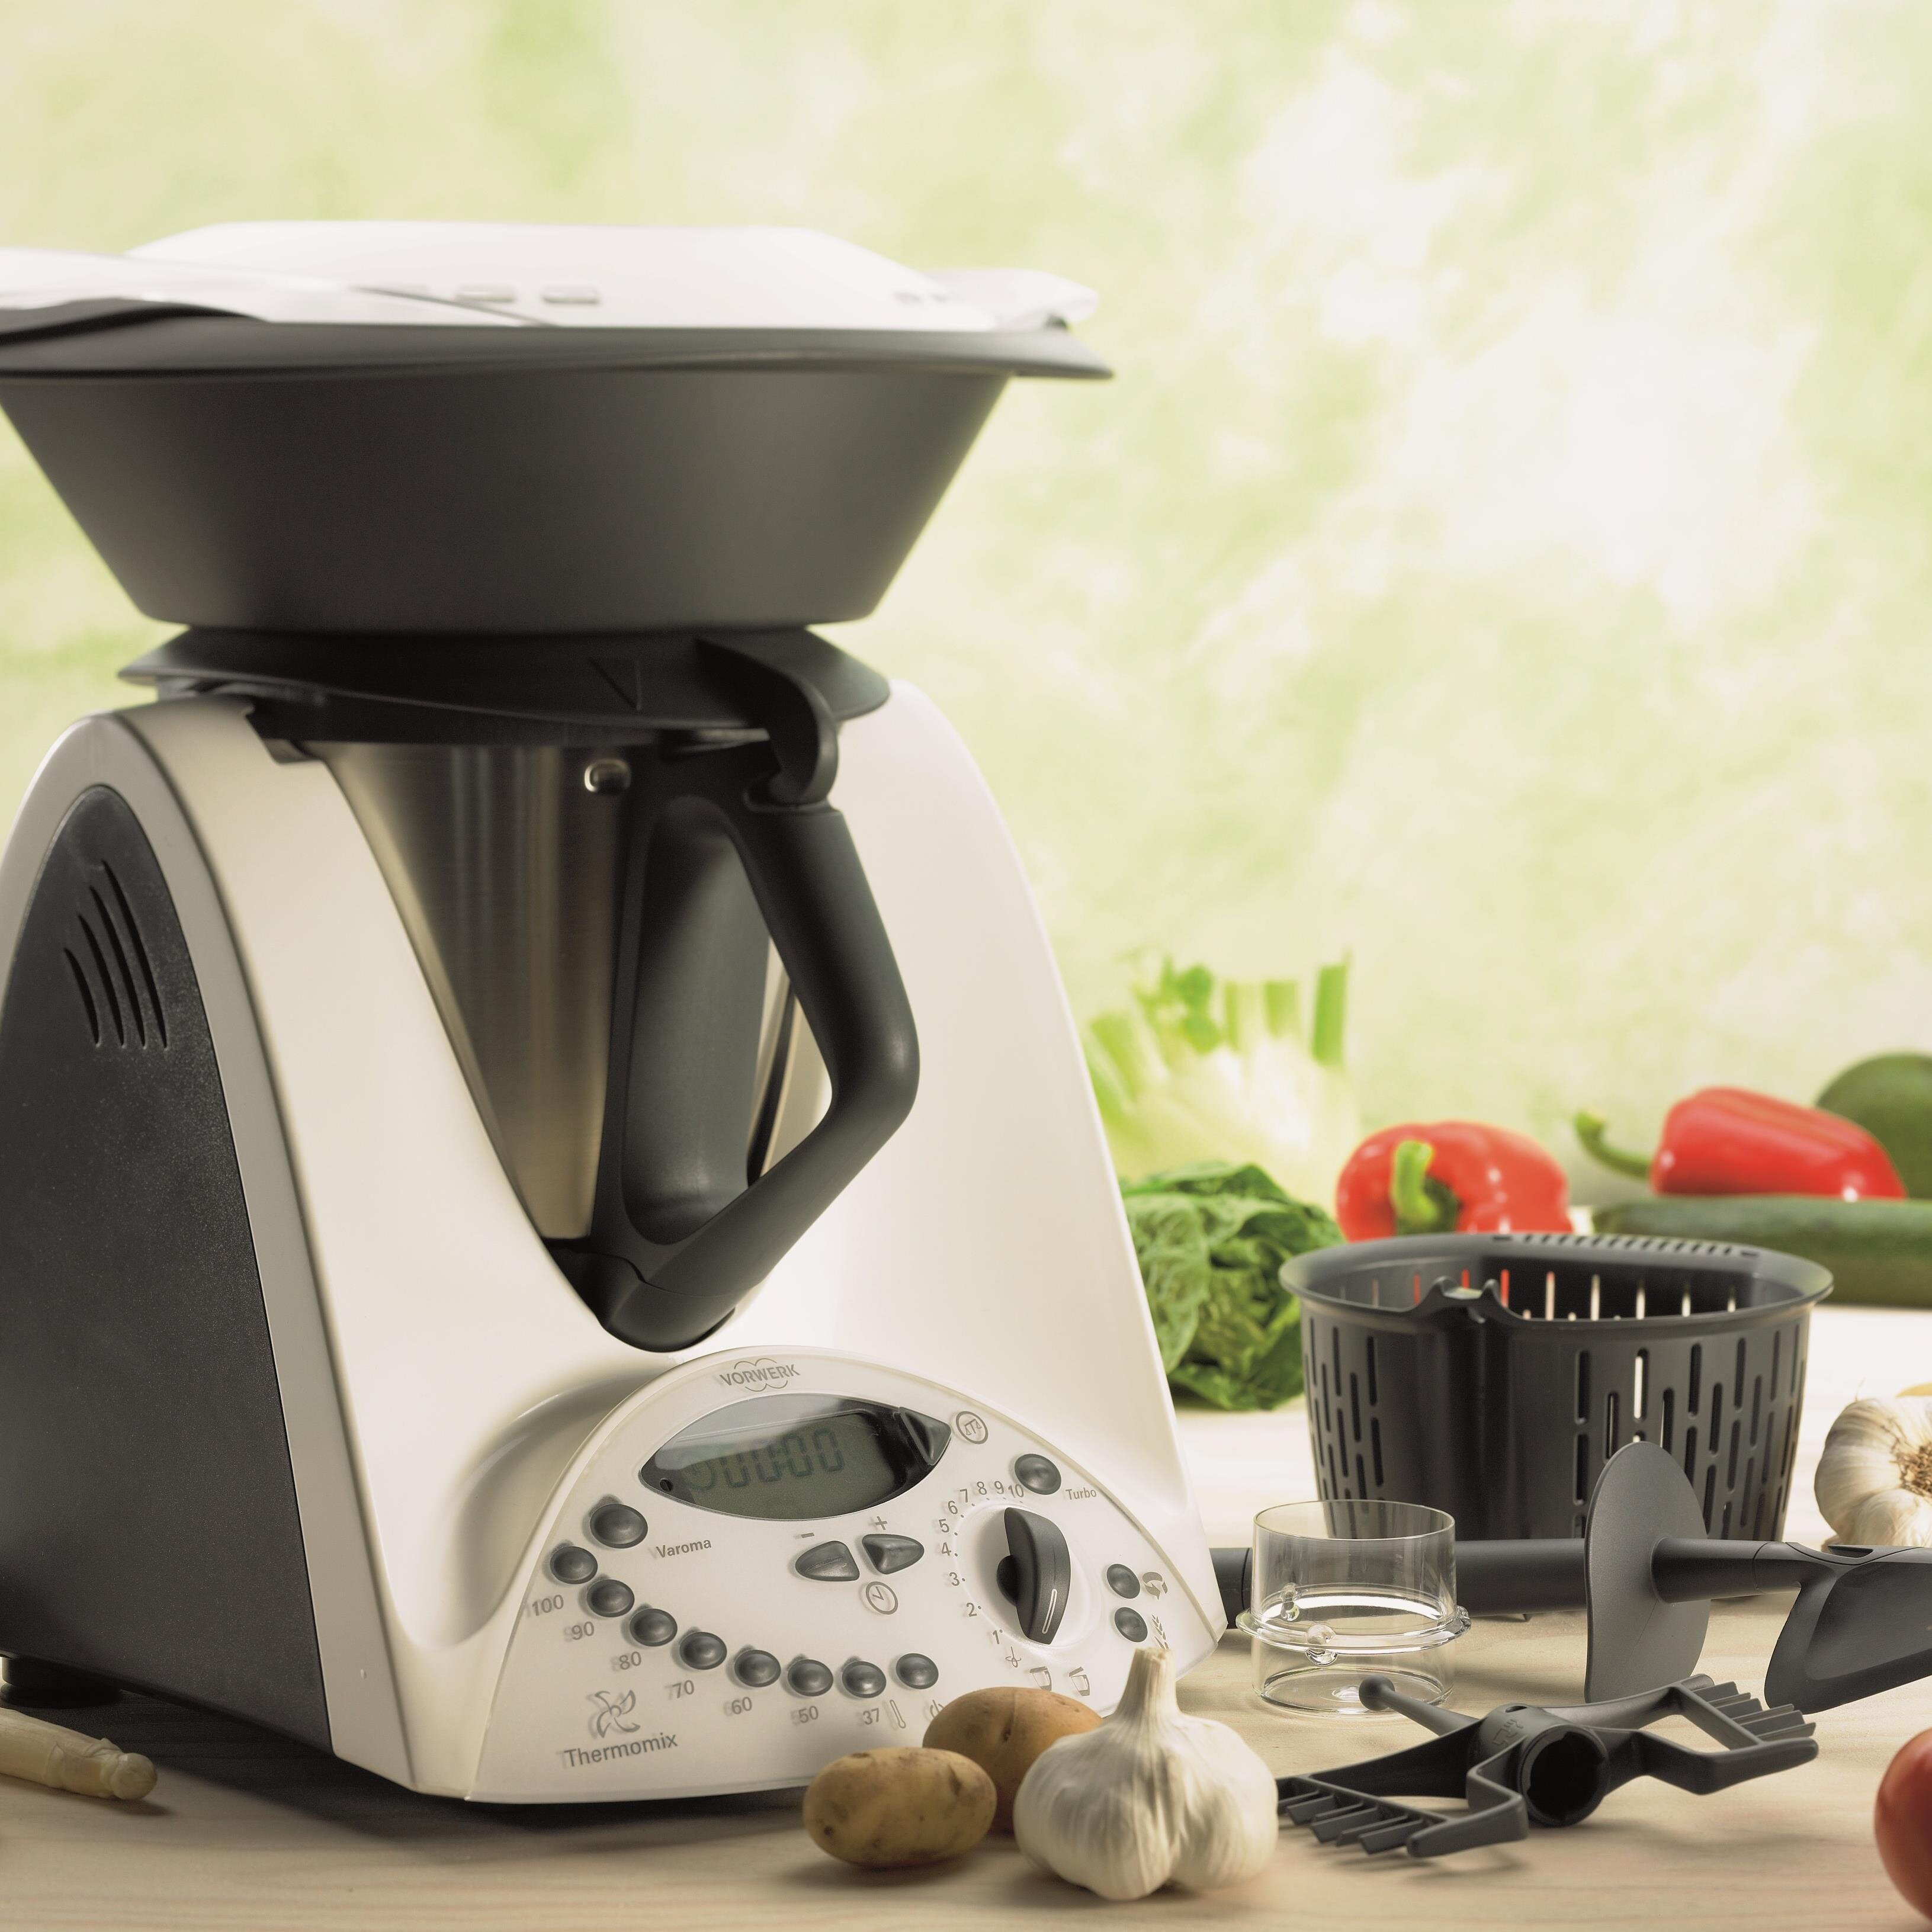 Thermomix is more than ten kitchen appliances in one compact unit. It makes food preparation easy, fun & very fast. It also sautees, steams and cooks!